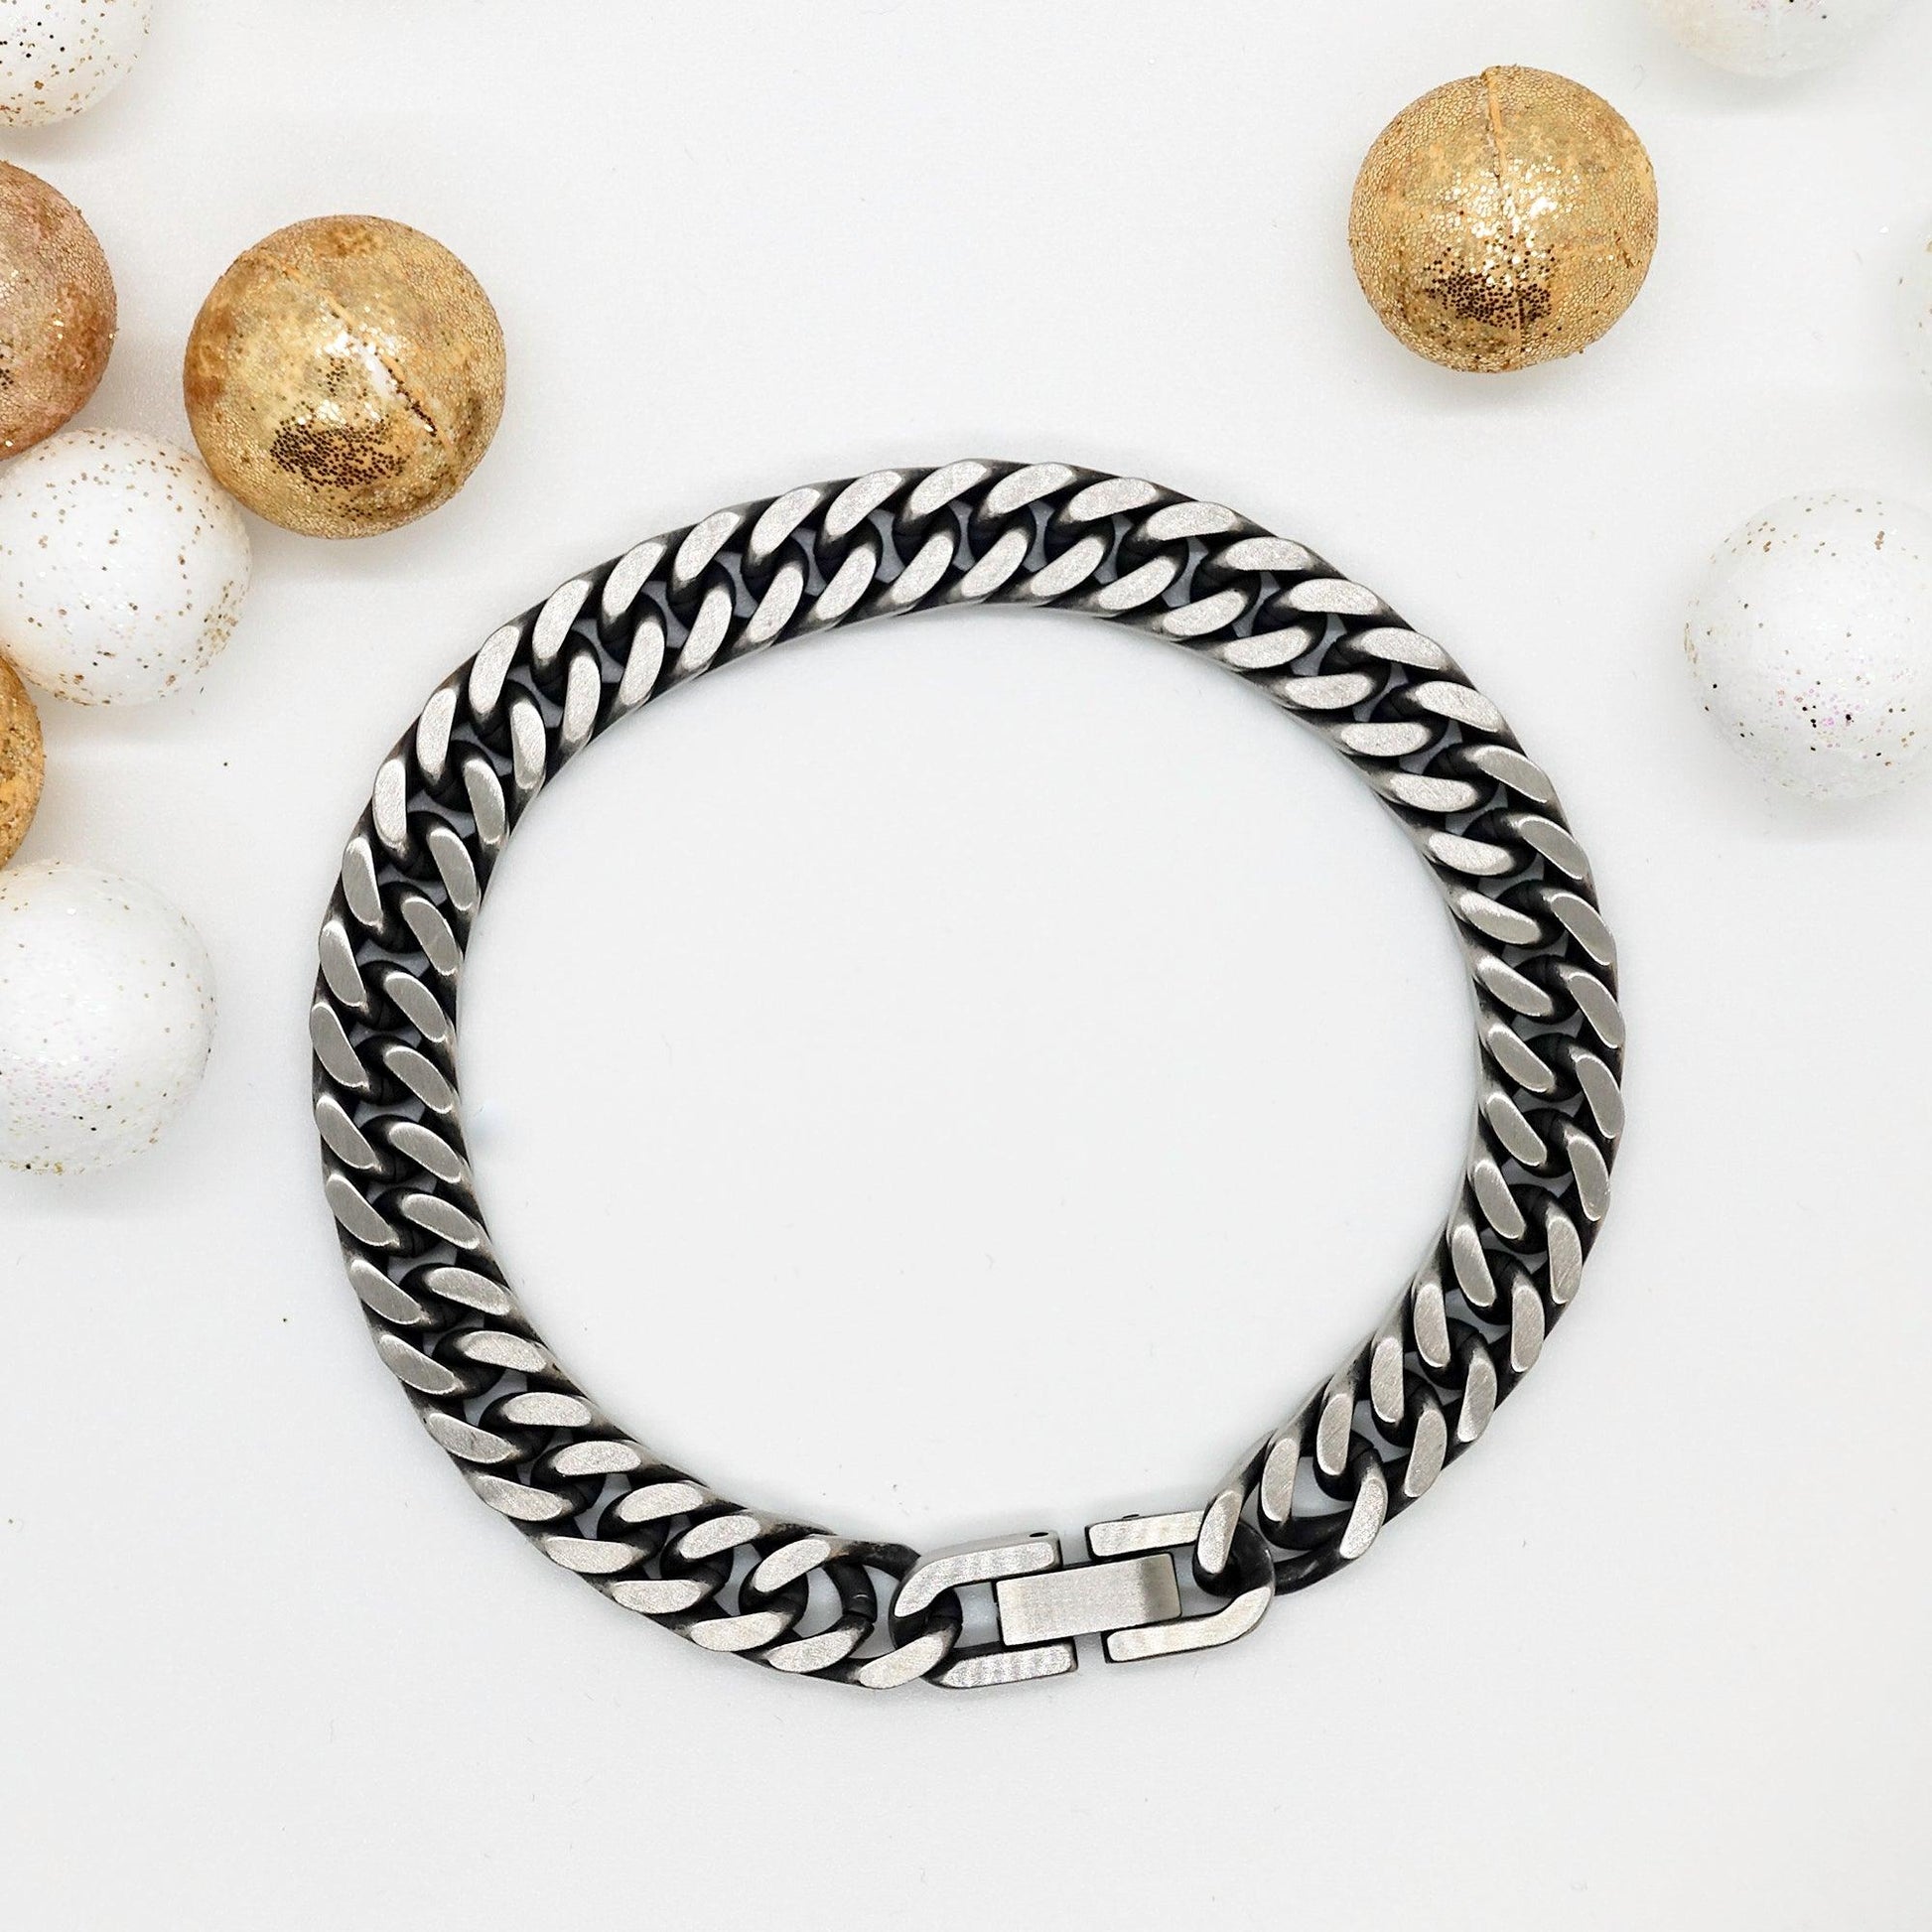 Remarkable Butcher Gifts, Your dedication and hard work, Inspirational Birthday Christmas Unique Cuban Link Chain Bracelet For Butcher, Coworkers, Men, Women, Friends - Mallard Moon Gift Shop